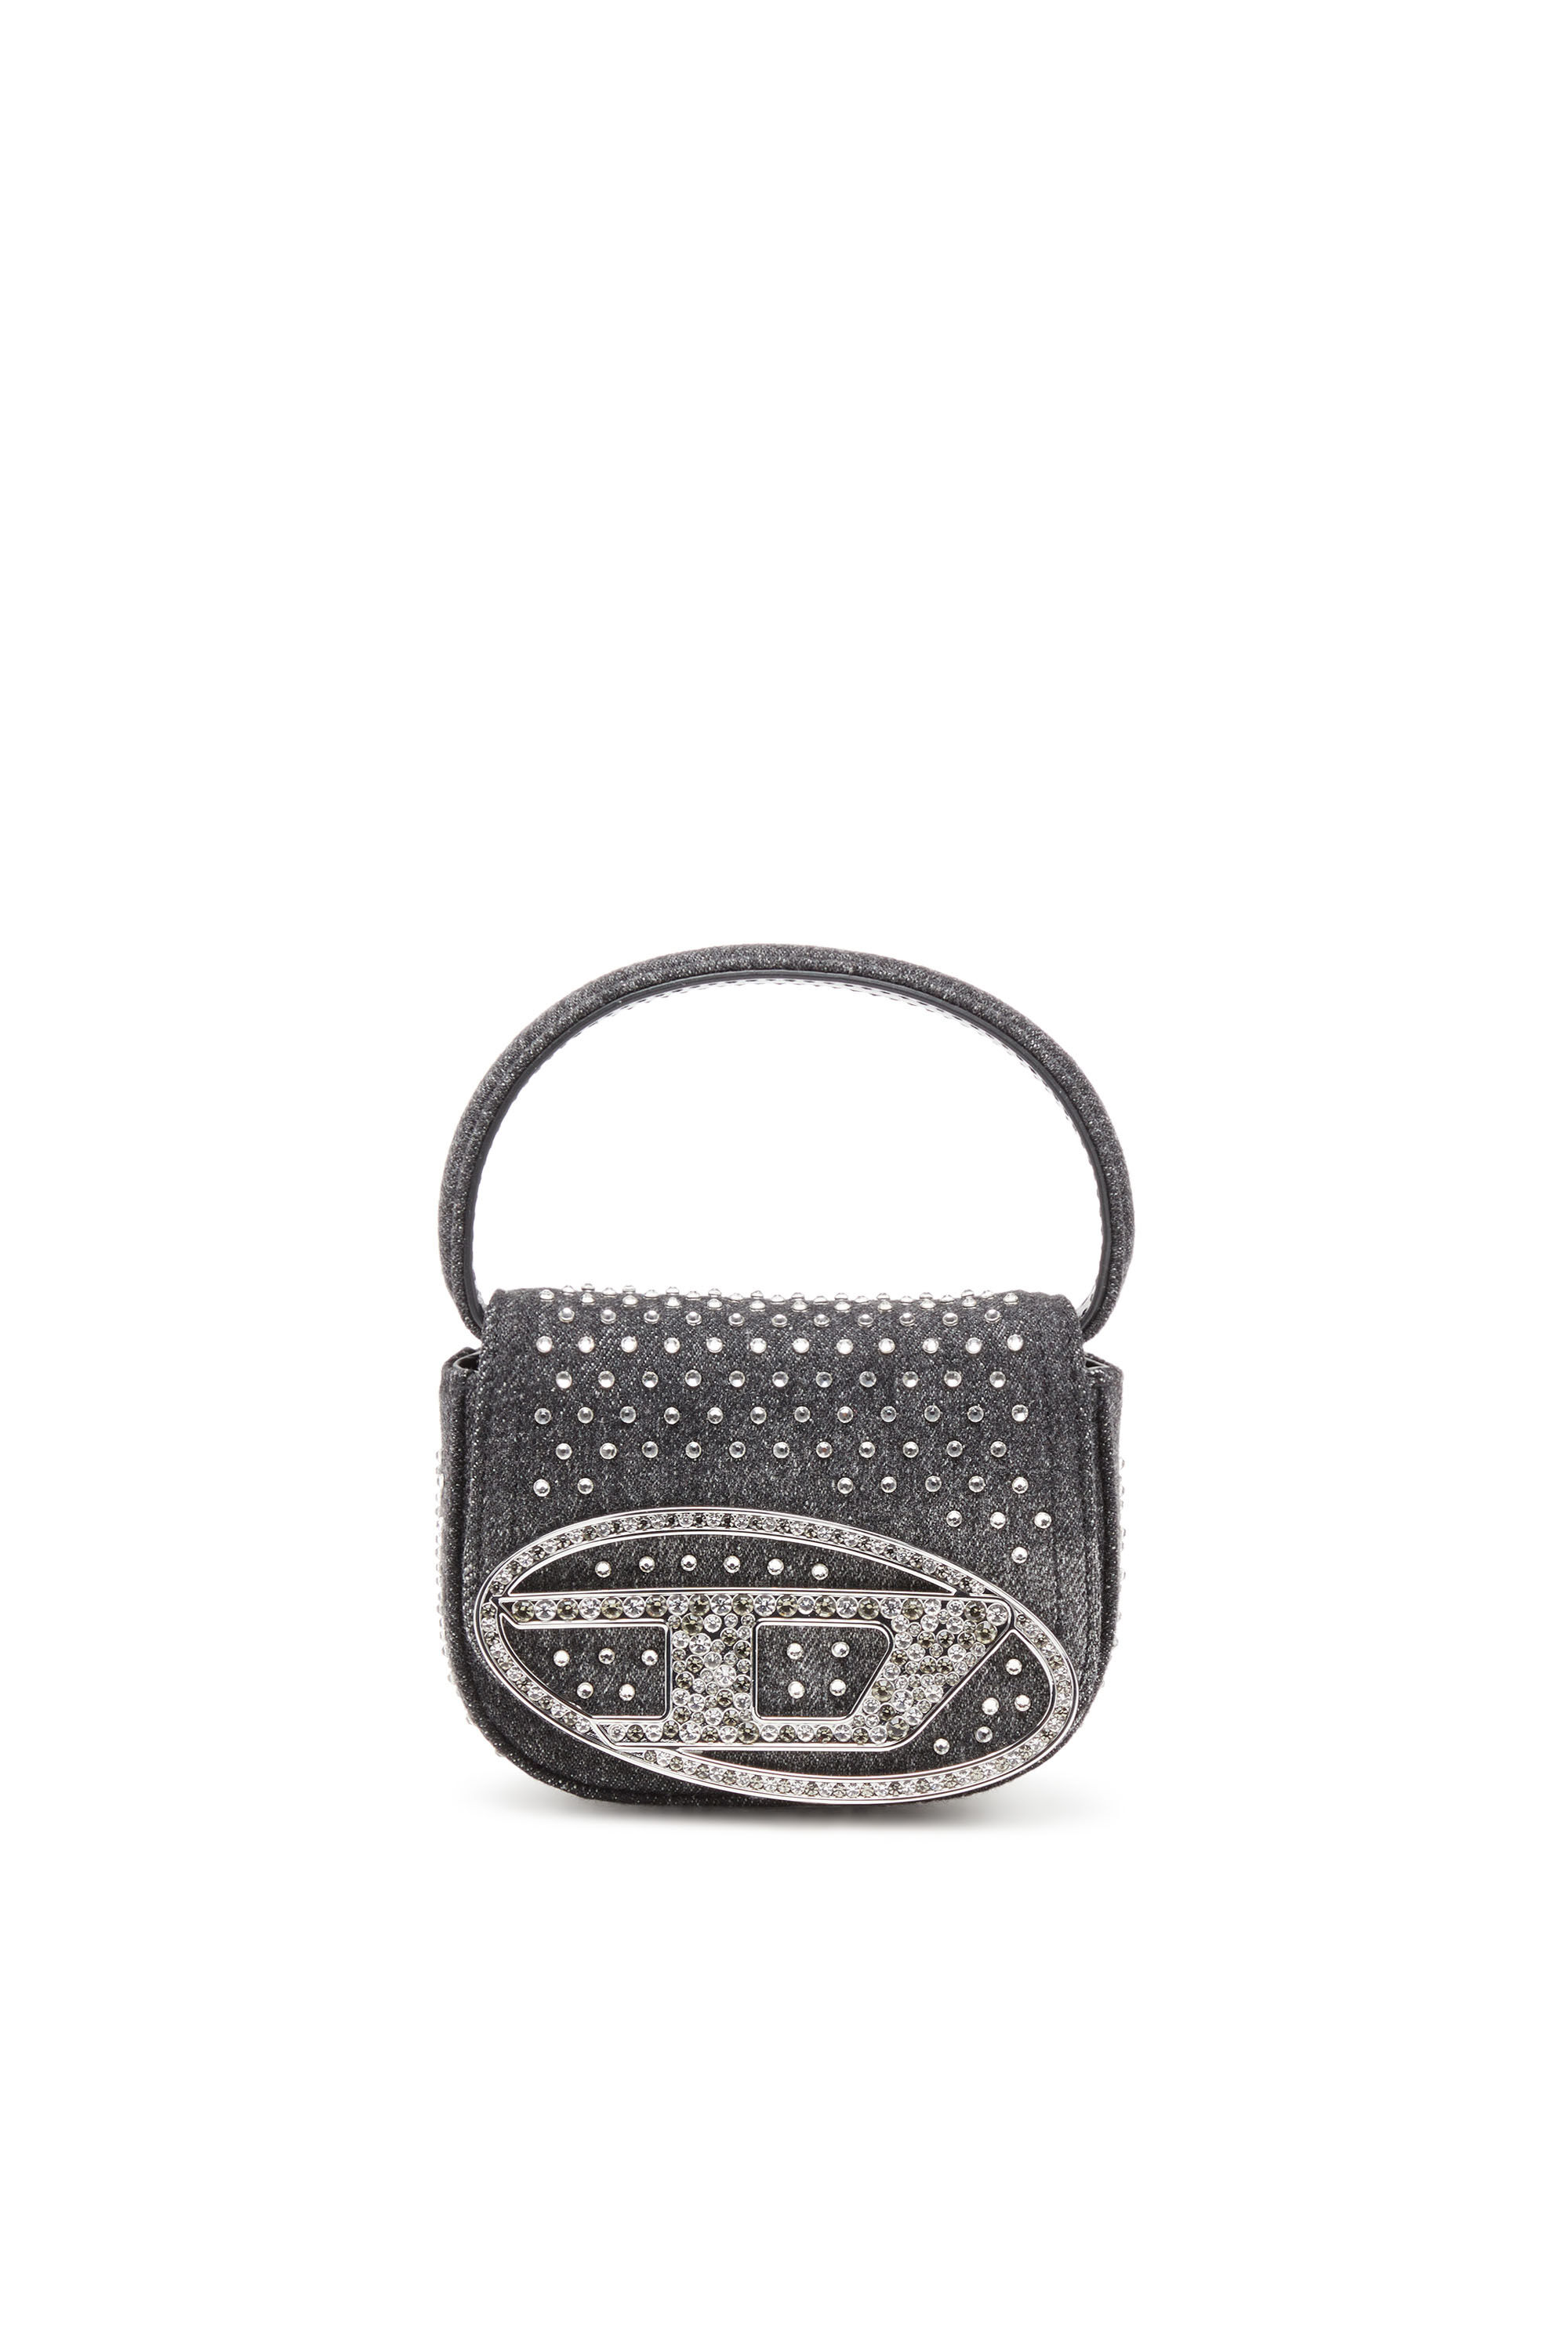 1DR XS 1DR Xs - Iconic mini bag in denim and crystals｜ブラック 